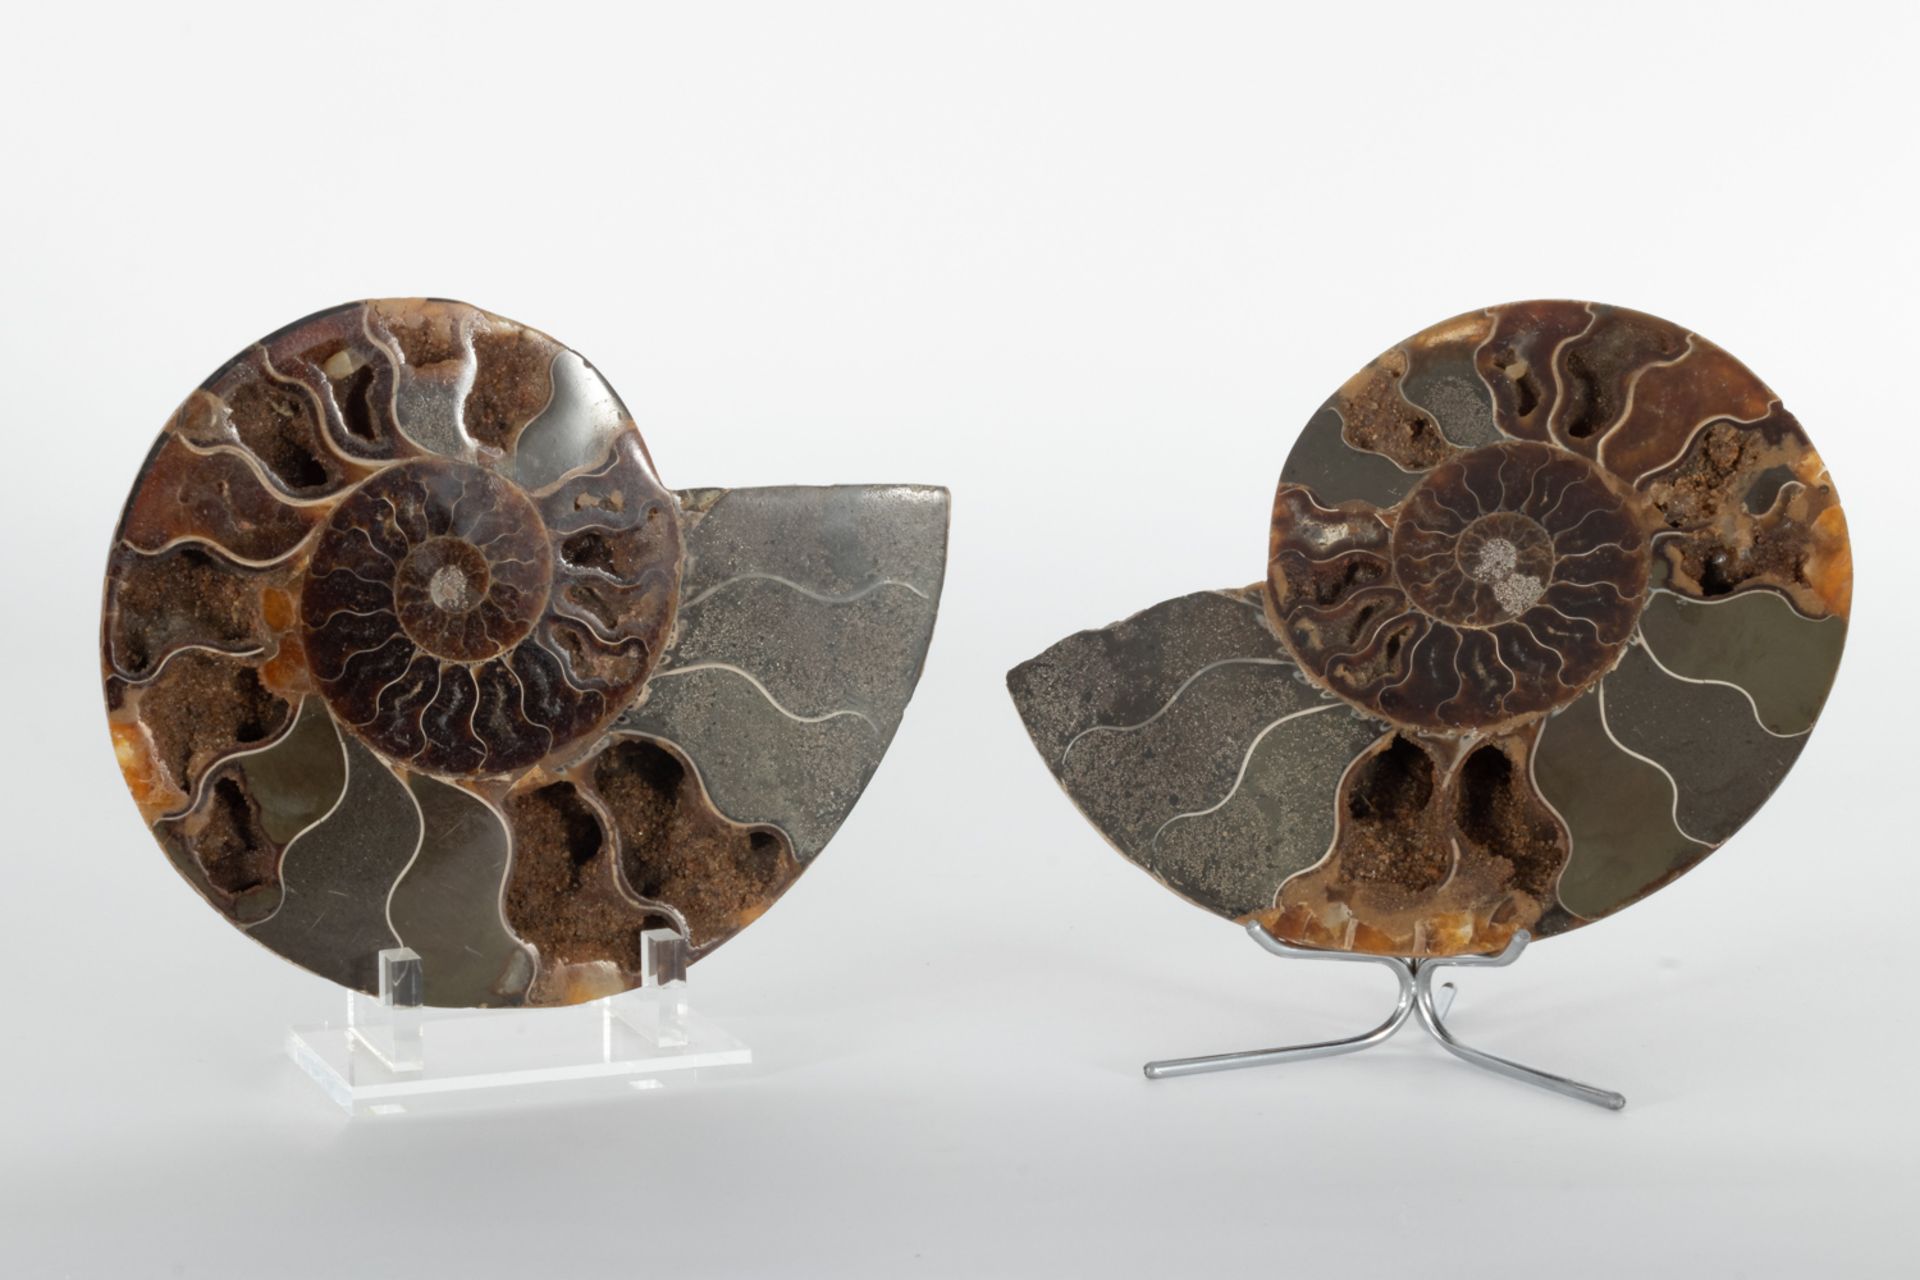 Two ammonite fossils. 